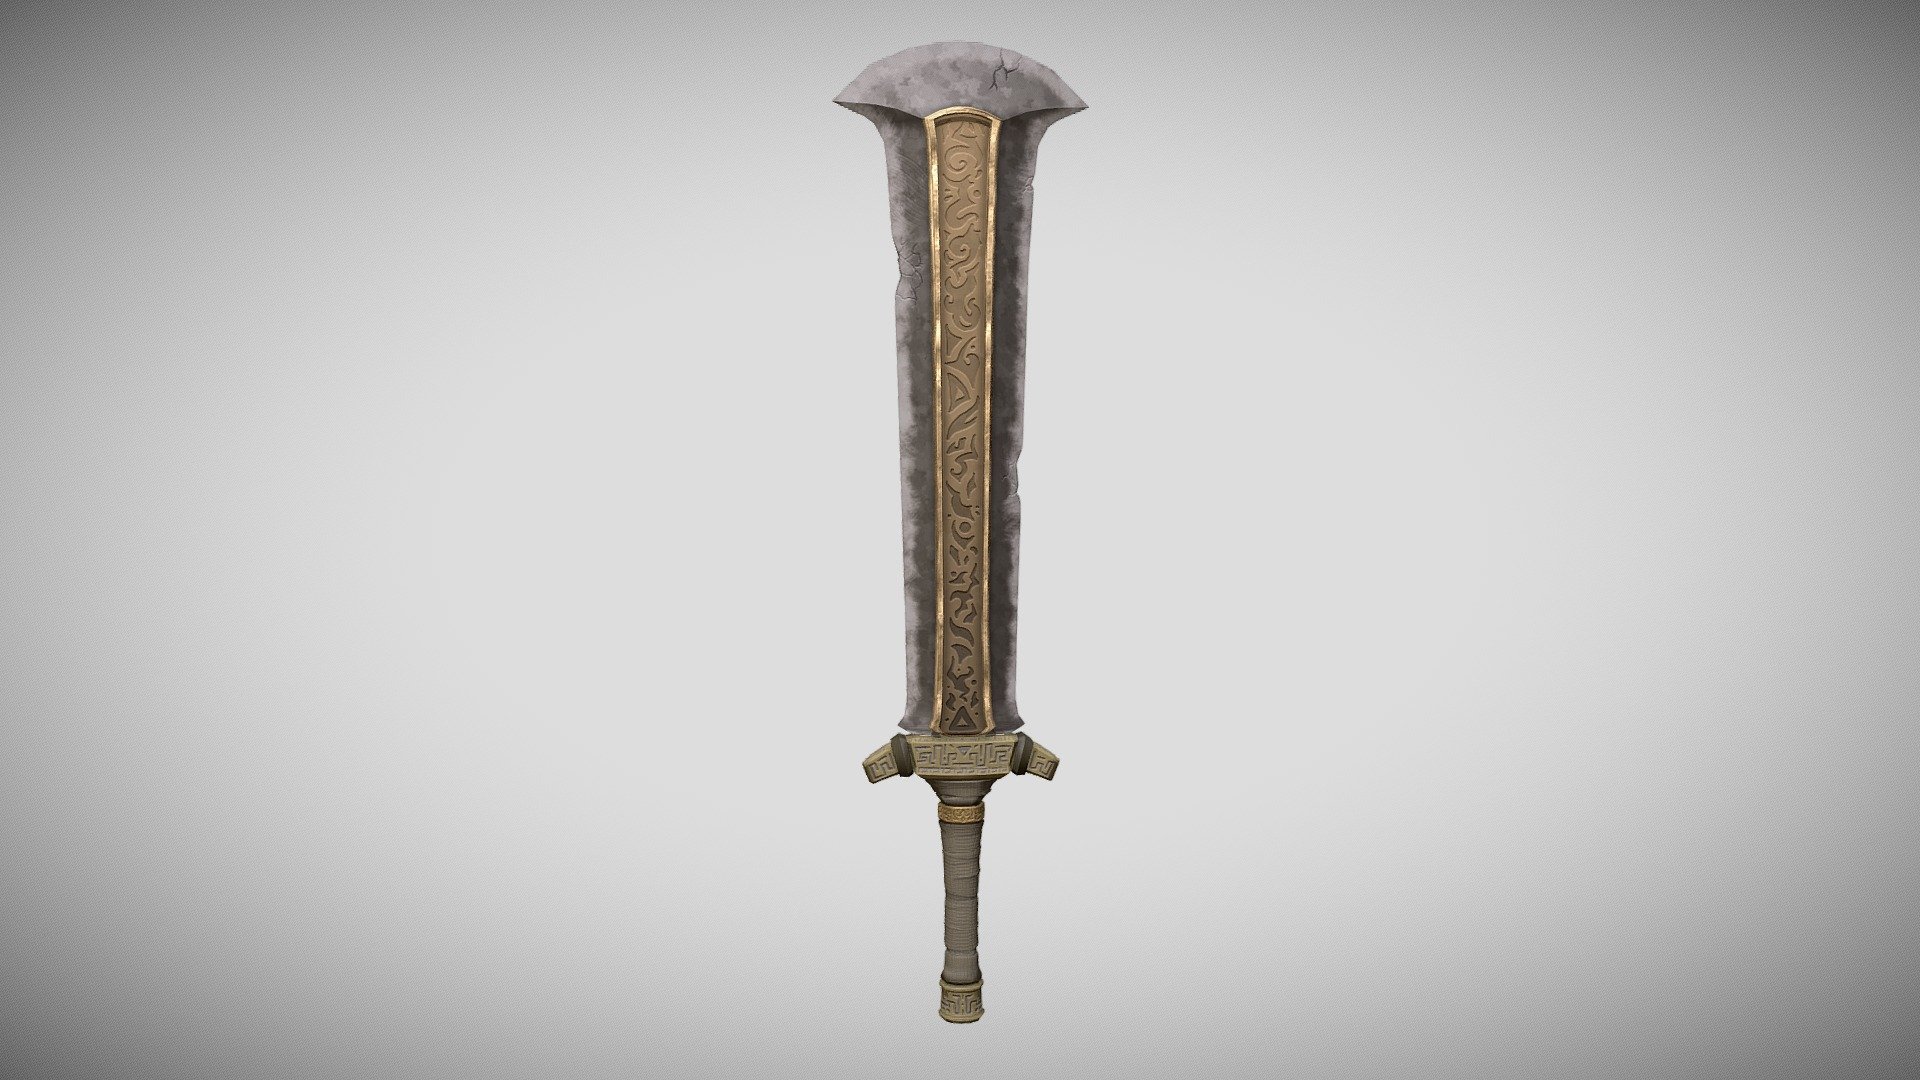 A different take on Ganondorf's sword from The Legend of Zelda. So here it is, hope you like it.
(The Legend of Zelda is owned by Nintendo, this is free fan art and is NOT meant to be sold or used for profit in any way.)



This asset is free to download and use, all I ask in return is for some credit in any projects, videos, etc. that it is used in.
Just copy/paste the below statement:

&ldquo;Sword of the Desert King by Cory Smith (cory.smithereens on Sketchfab)